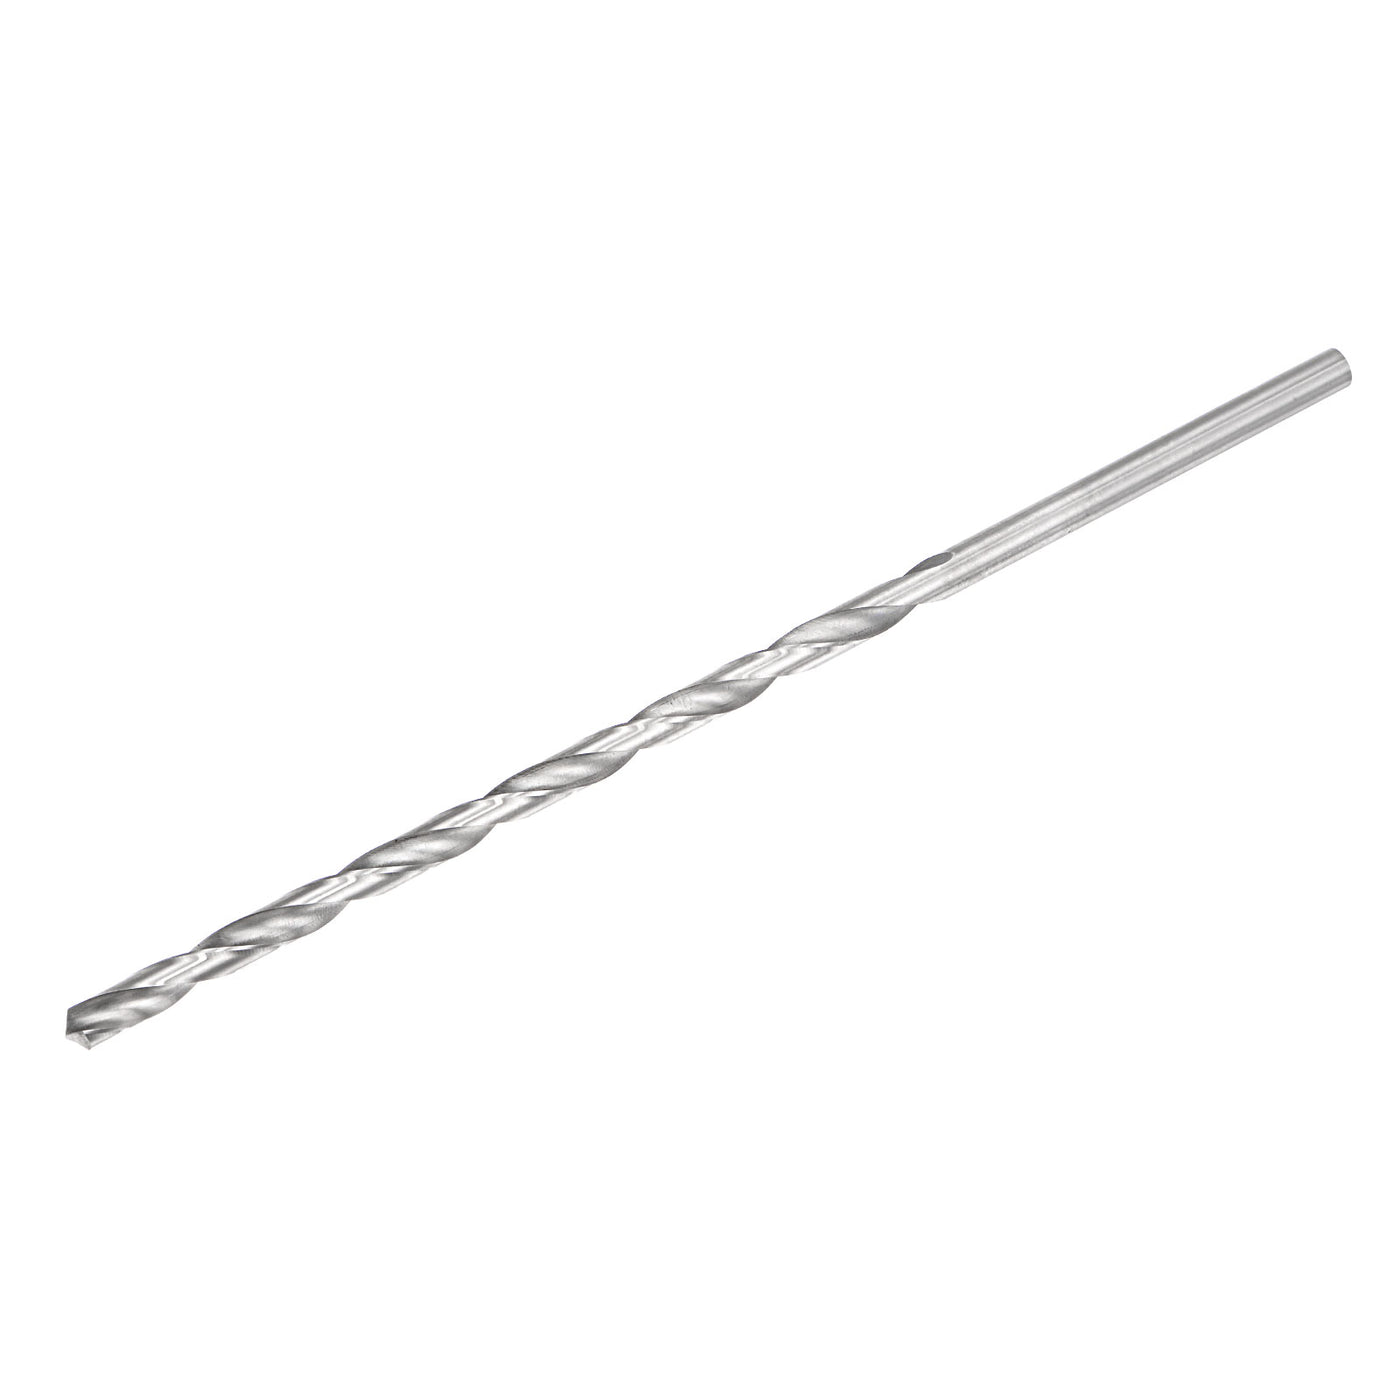 uxcell Uxcell 9mm Twist Drill Bits, High-Speed Steel Extra Long Drill Bit 305mm Length